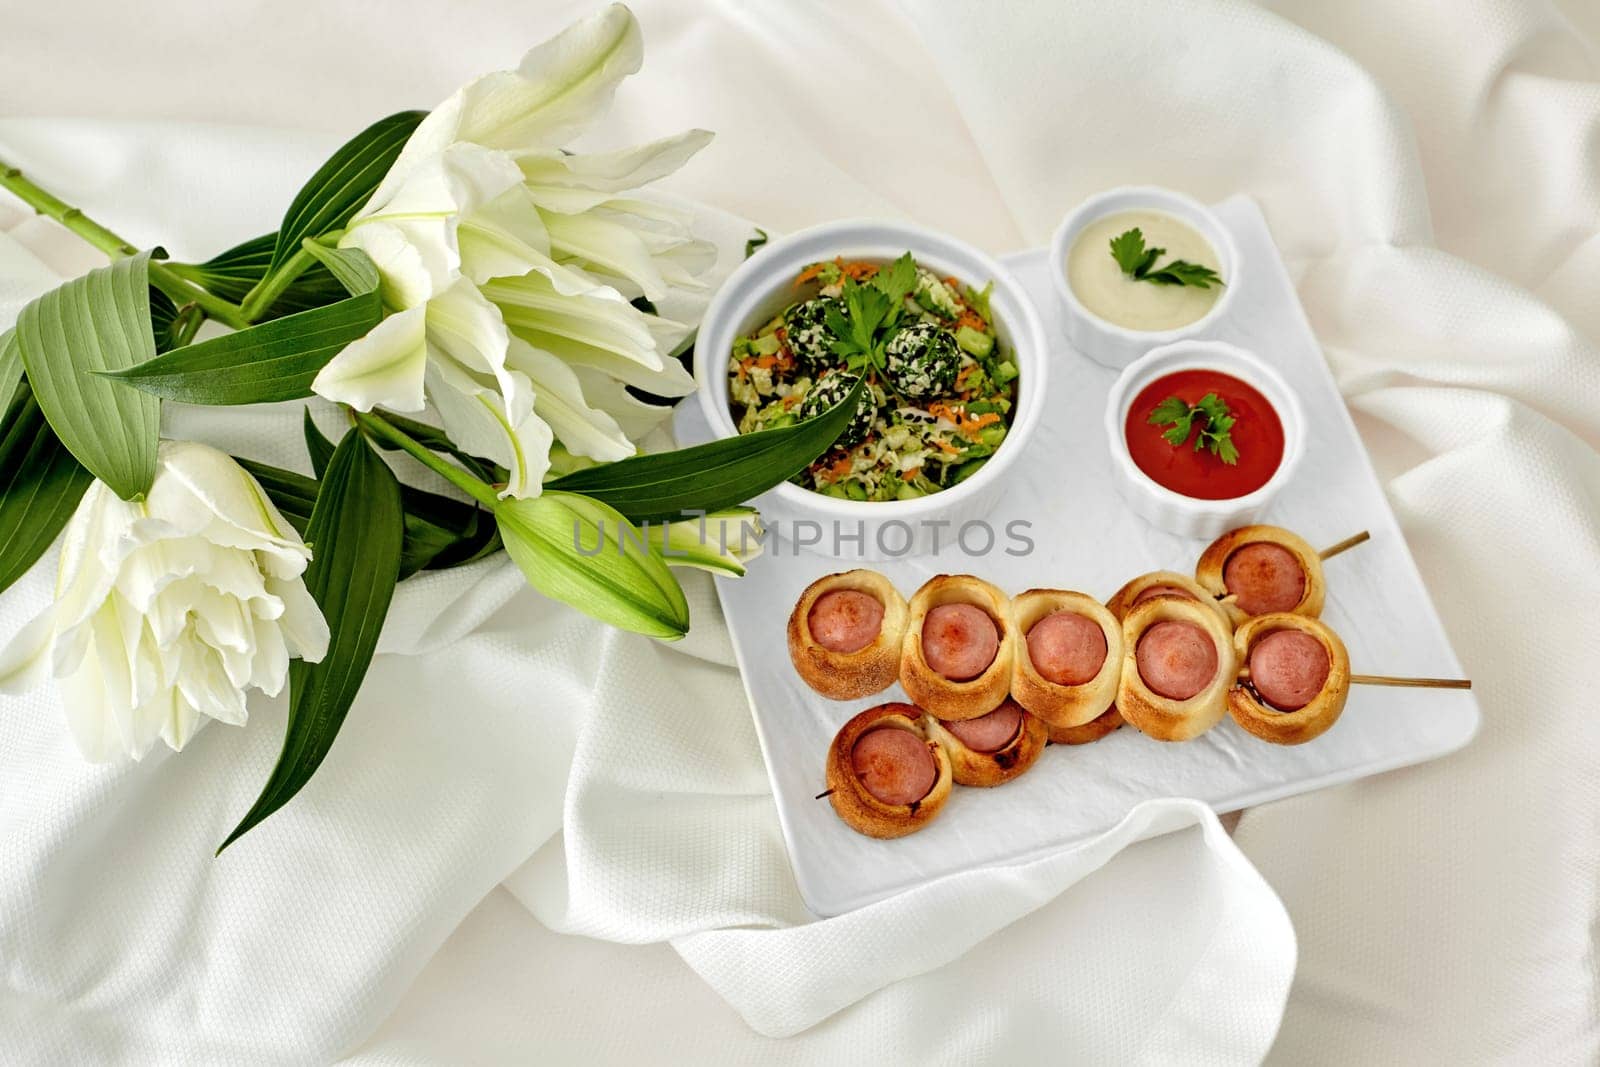 Elegant romantic snack arrangement featuring pigs in blankets on skewers, fresh green salad, dipping sauces, and fragrant white lilies on white fabric background